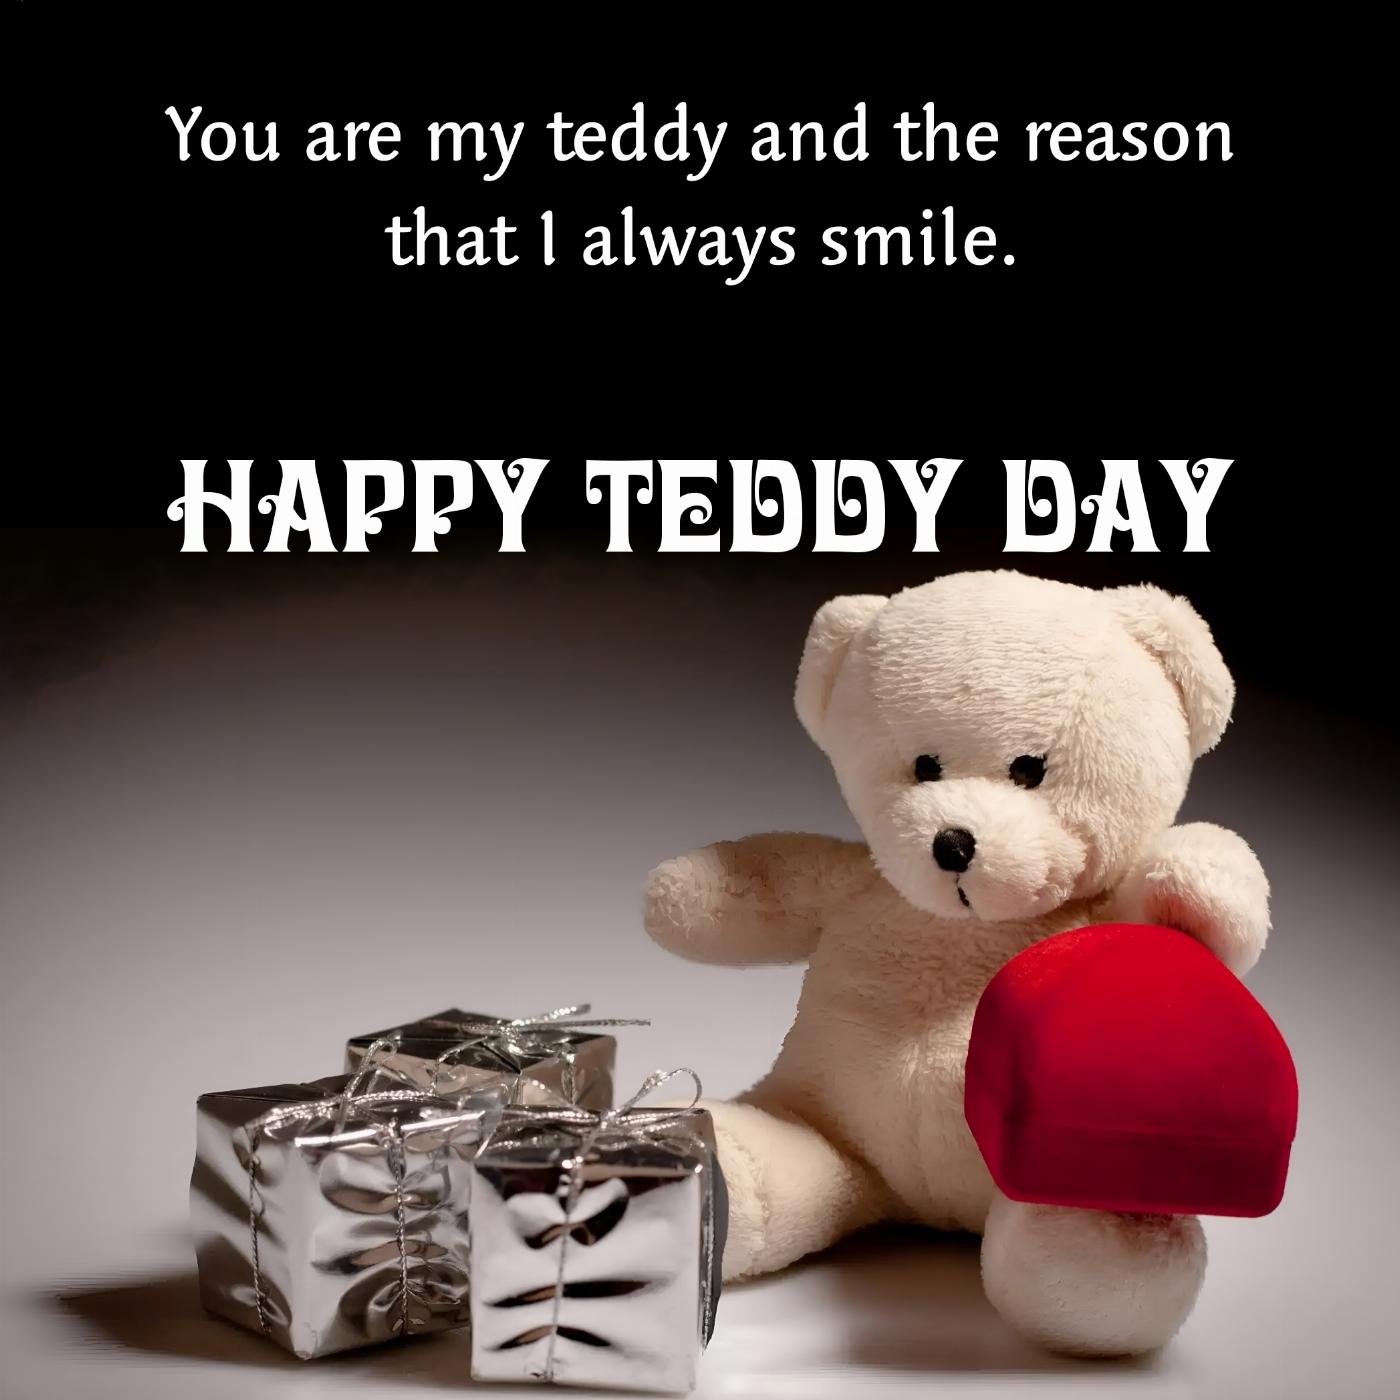 You are my teddy and the reason that I always smile